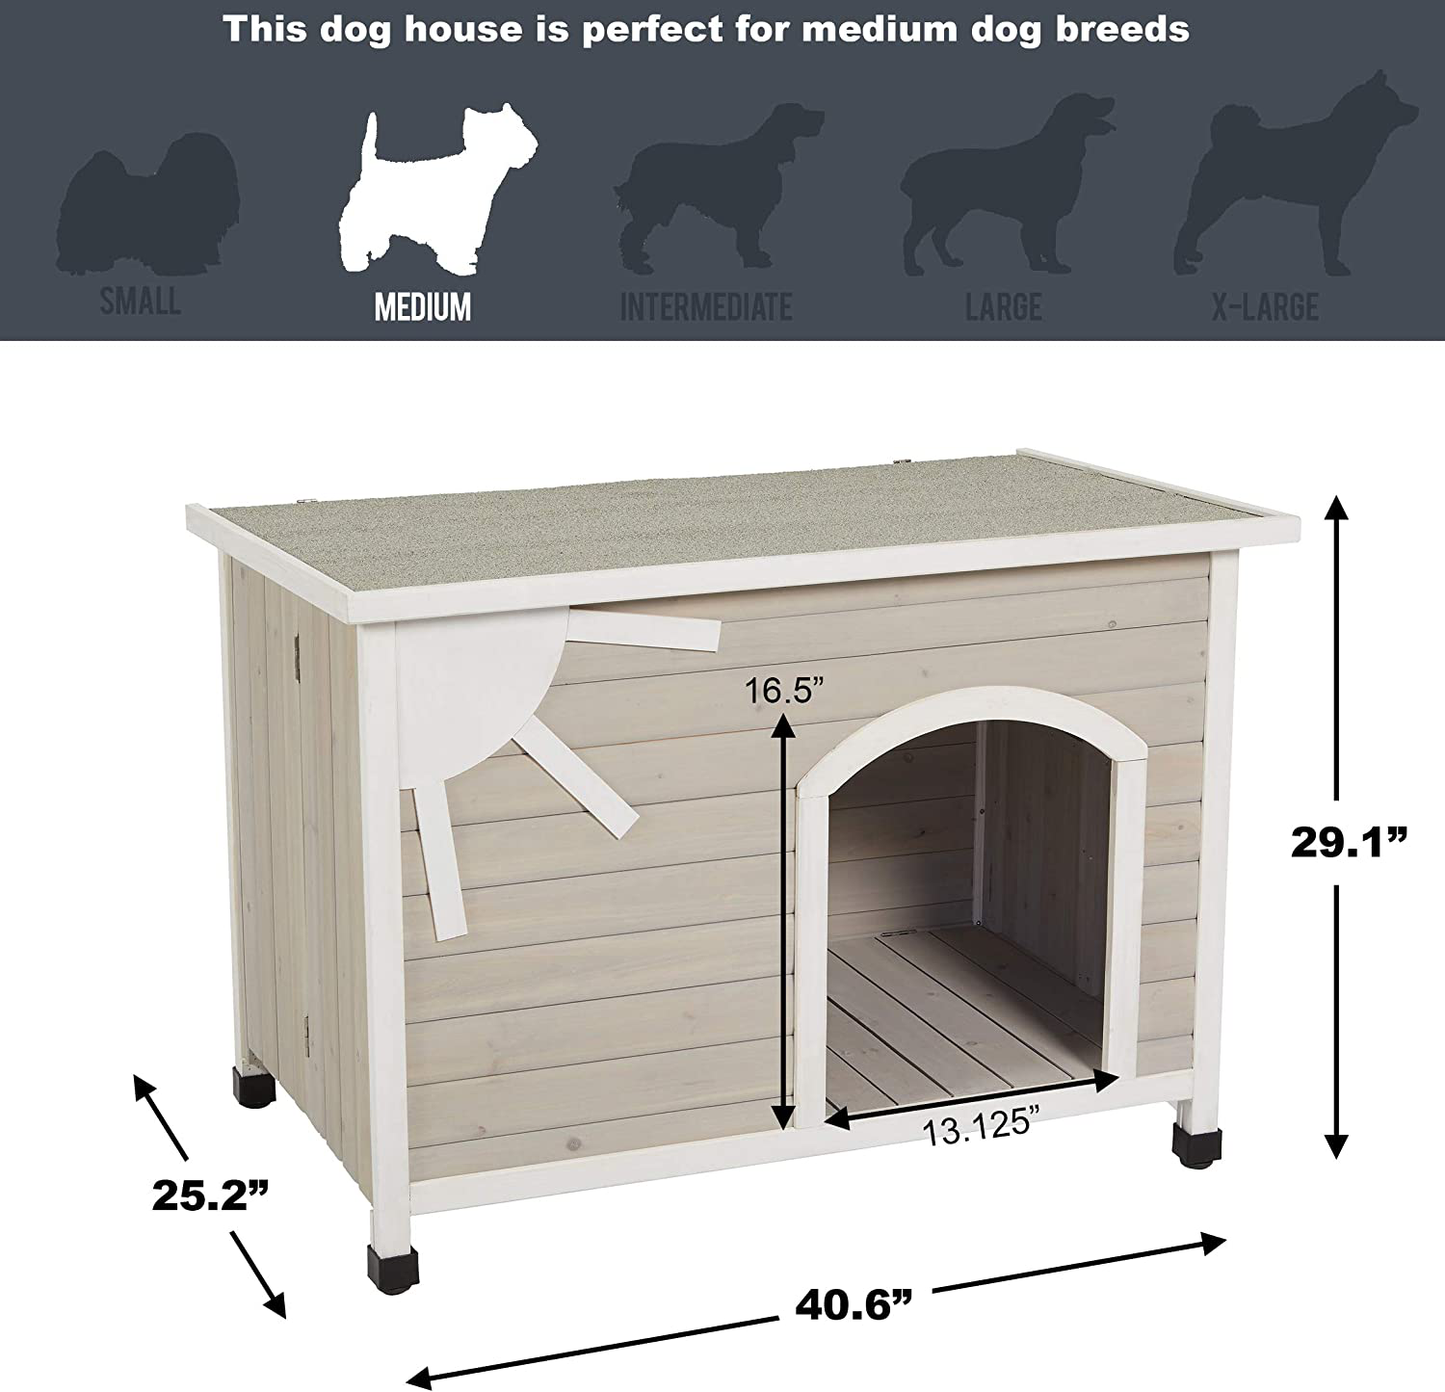 Midwest Homes for Pets Eillo Folding Outdoor Wood Dog House, No Tools Required for Assembly | Dog House Ideal for Medium Dog Breeds, Beige (12EWDH-M)